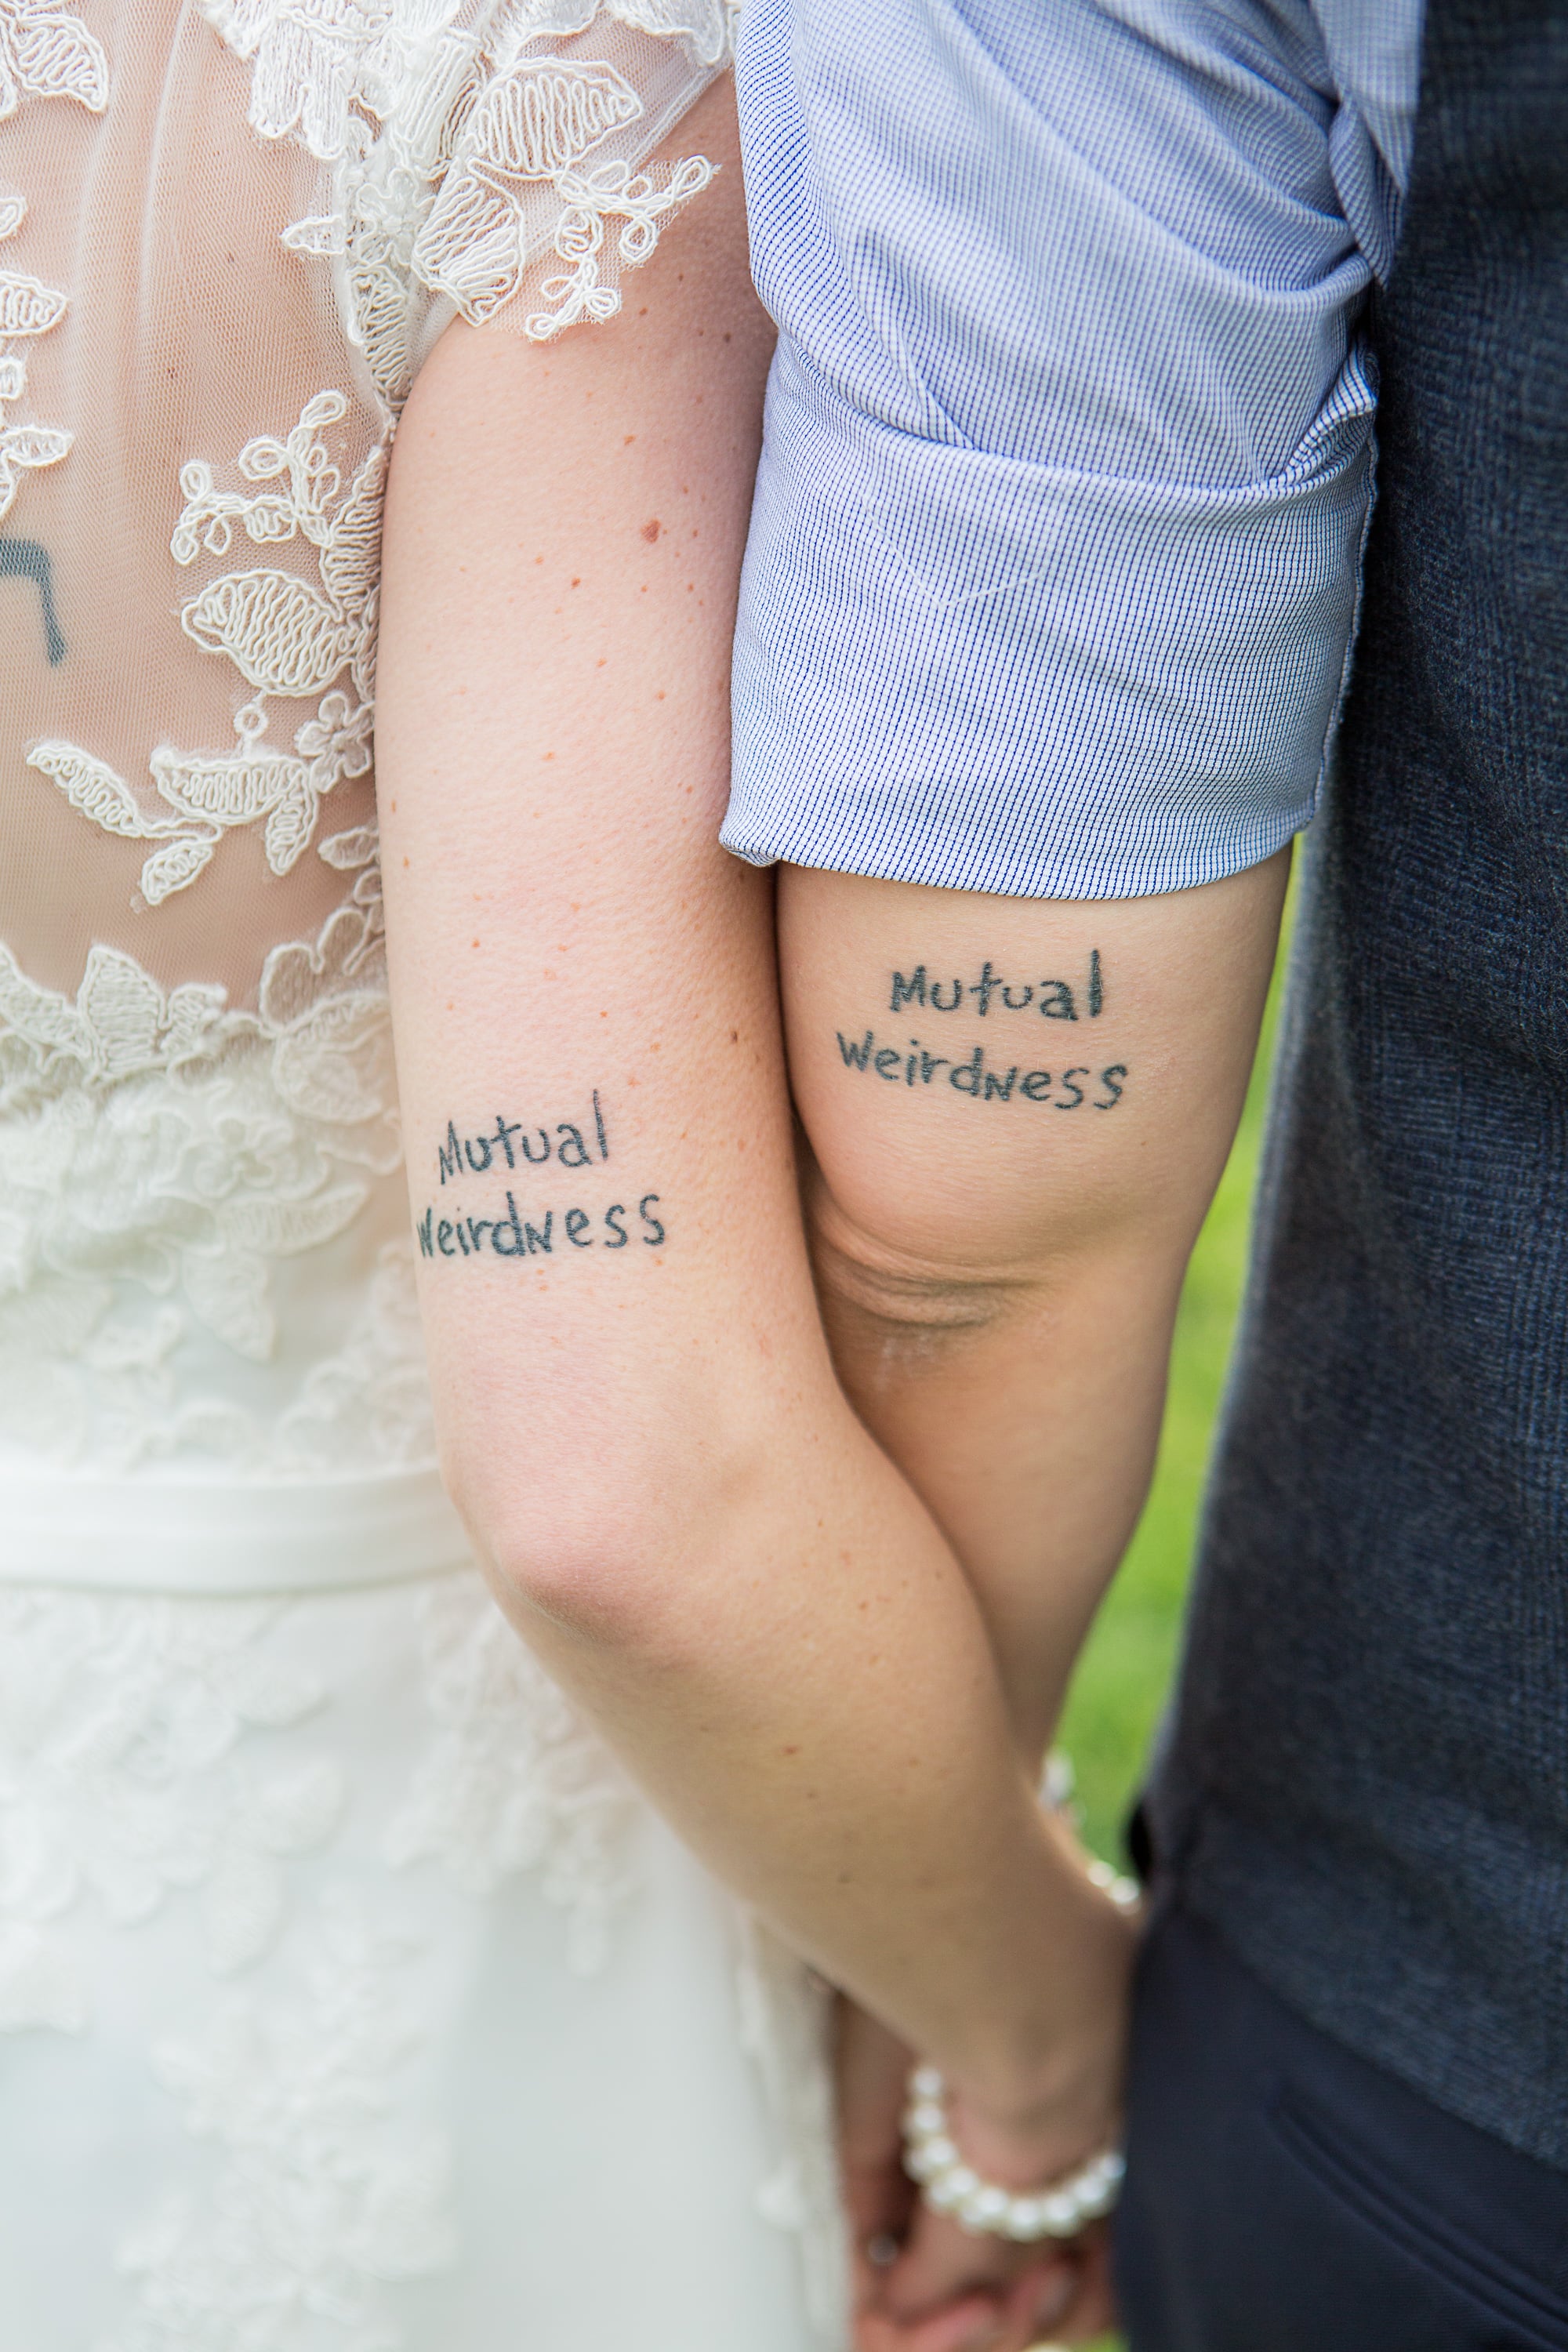 20 tattooed brides who prove wedding style comes in all packages  SheKnows